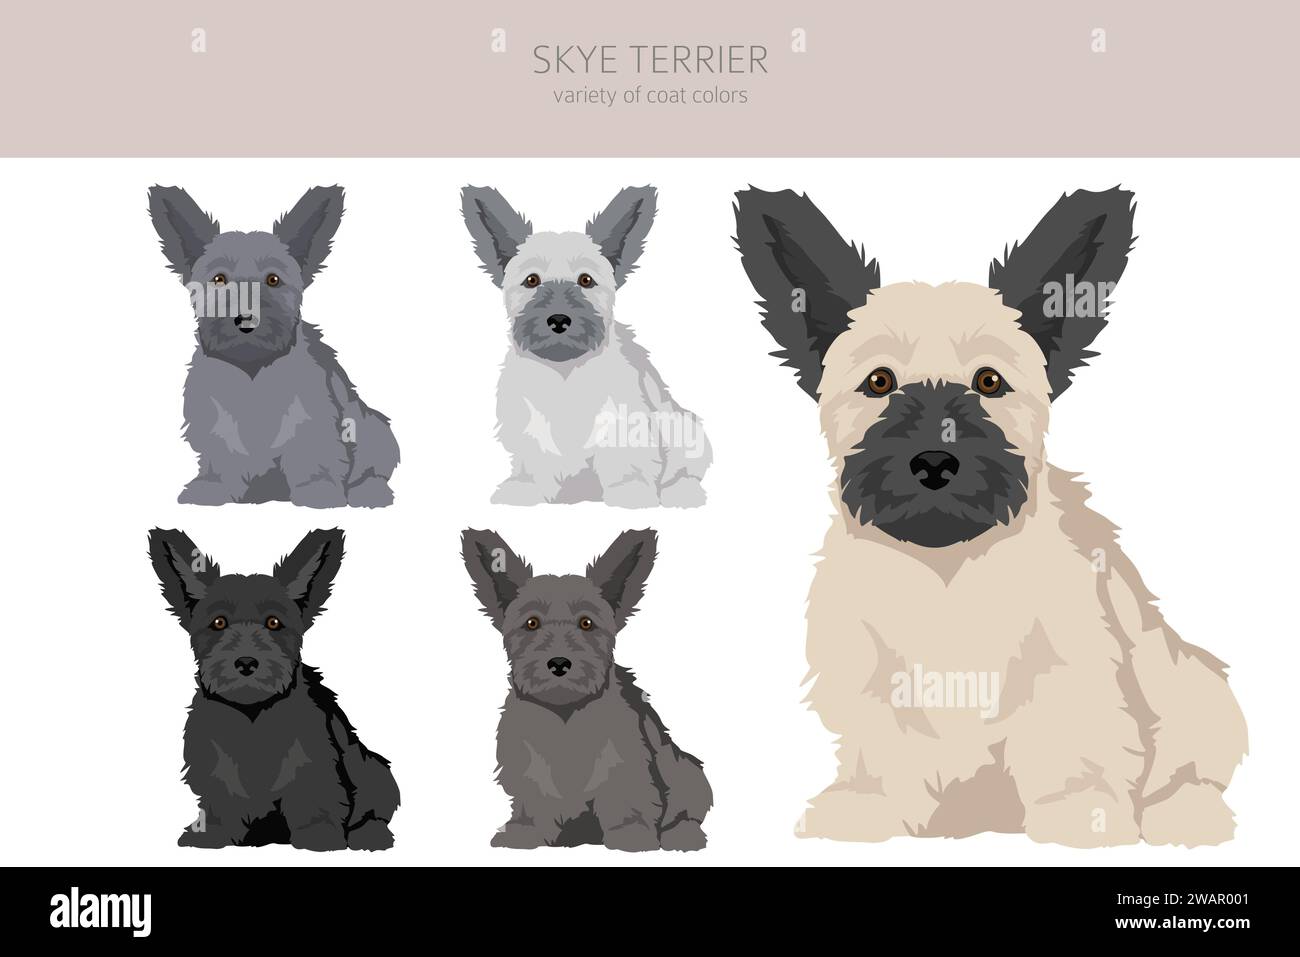 Skye terrier puppies coat colors, different poses clipart.  Vector illustration Stock Vector